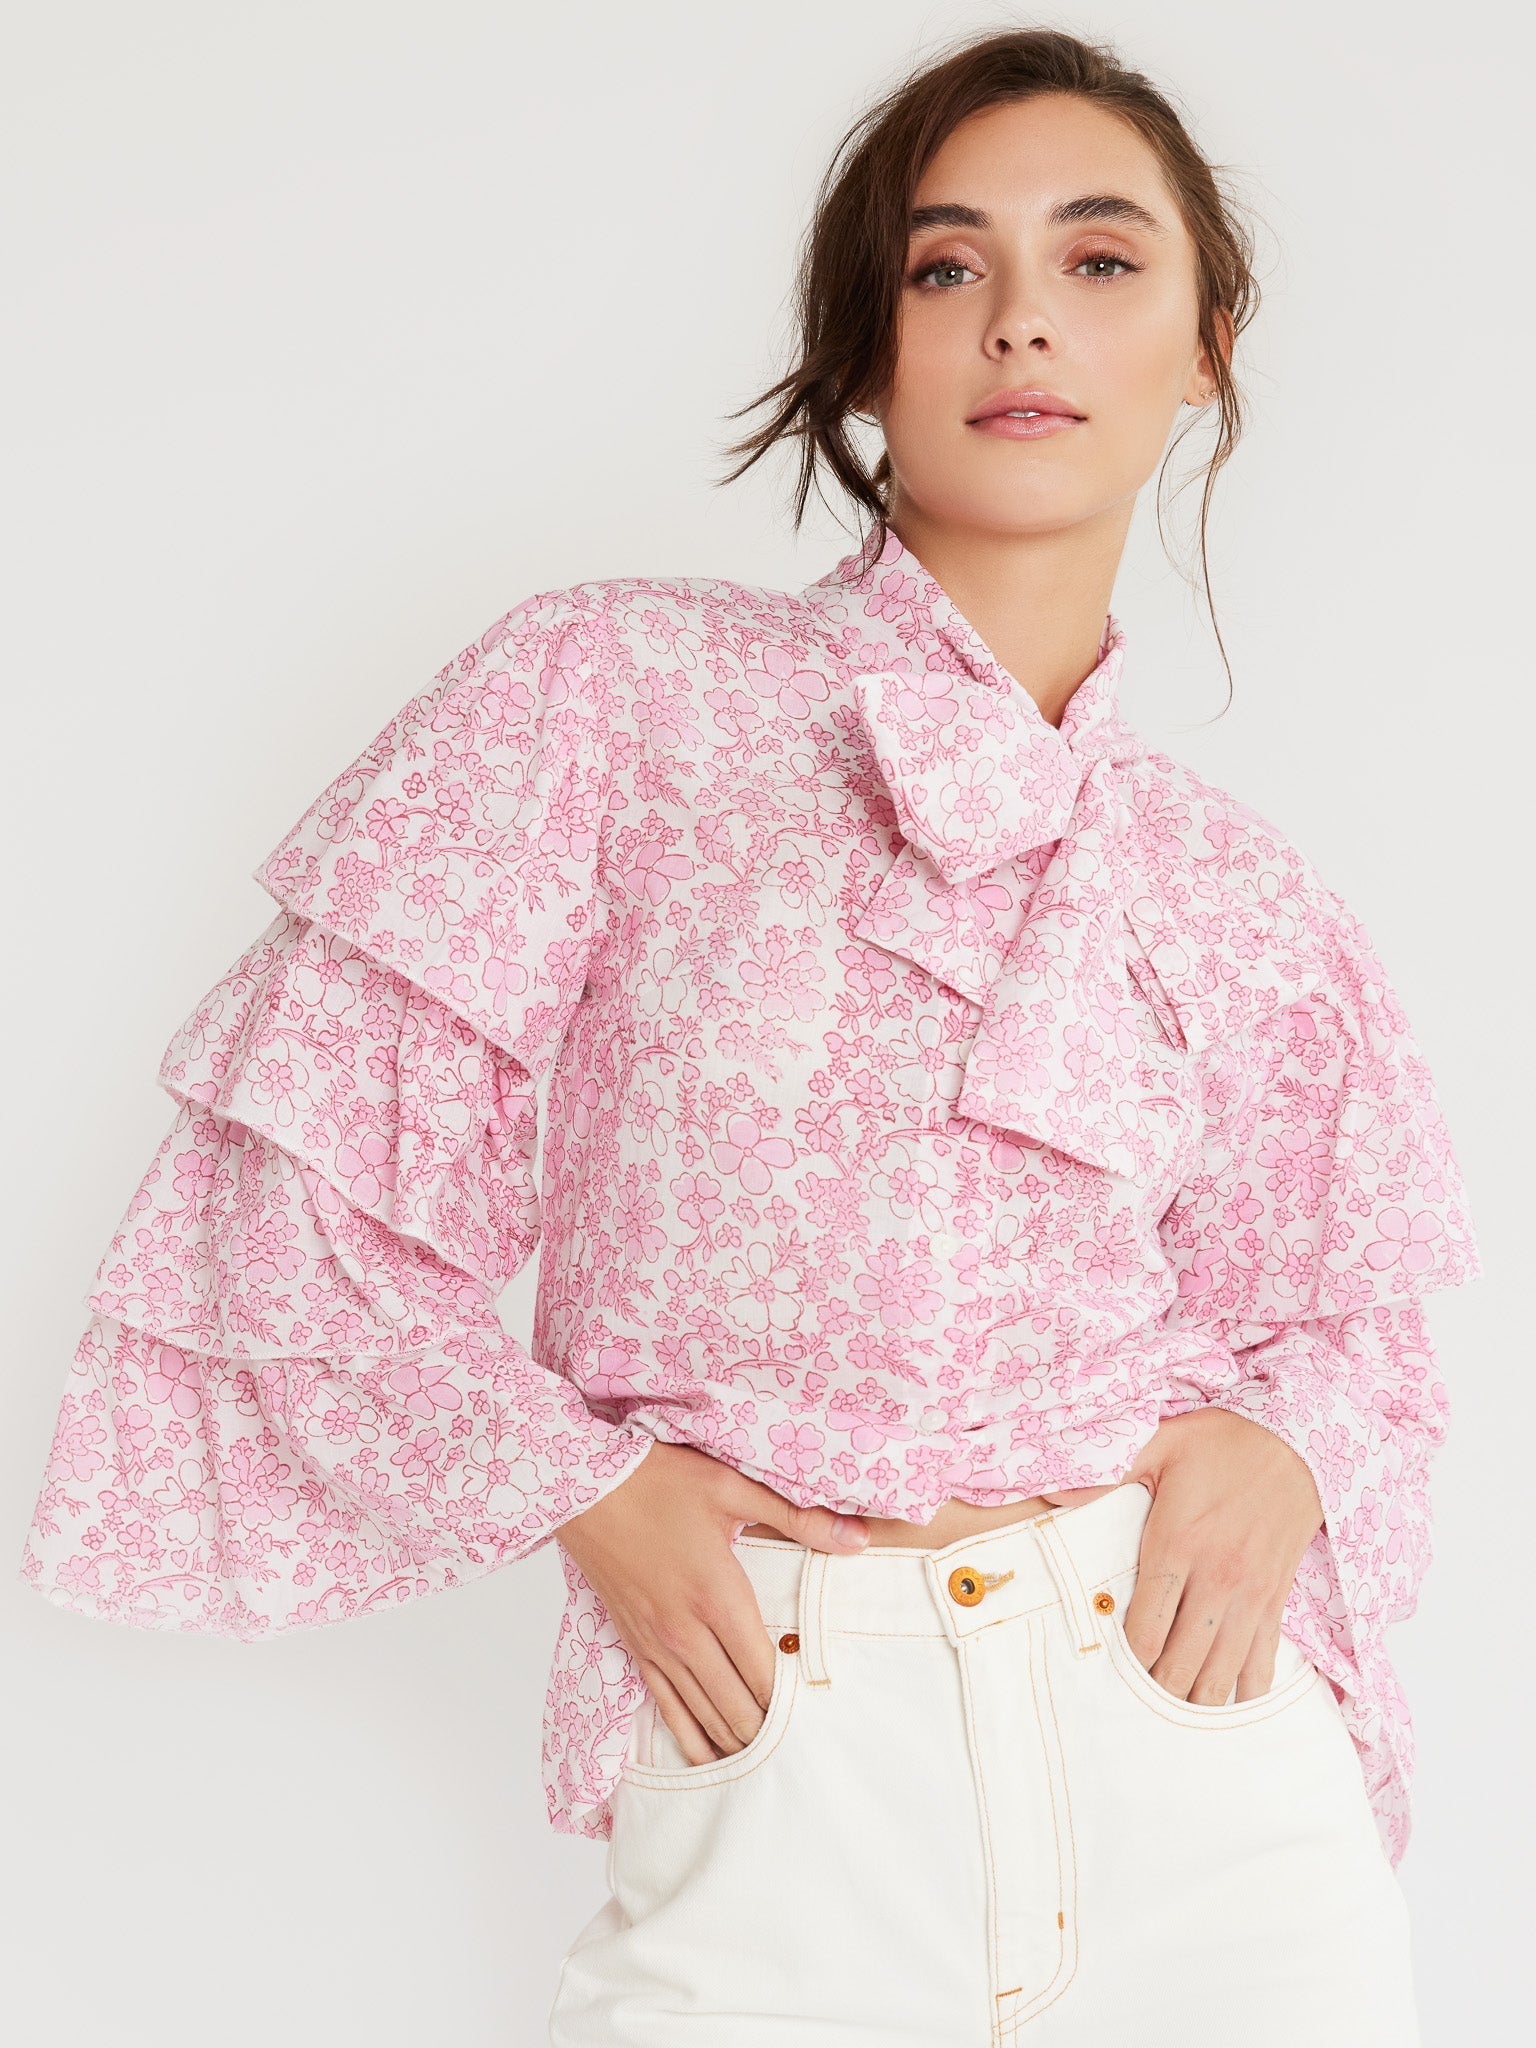 MILLE Clothing Fifi Top in Jaipur Floral